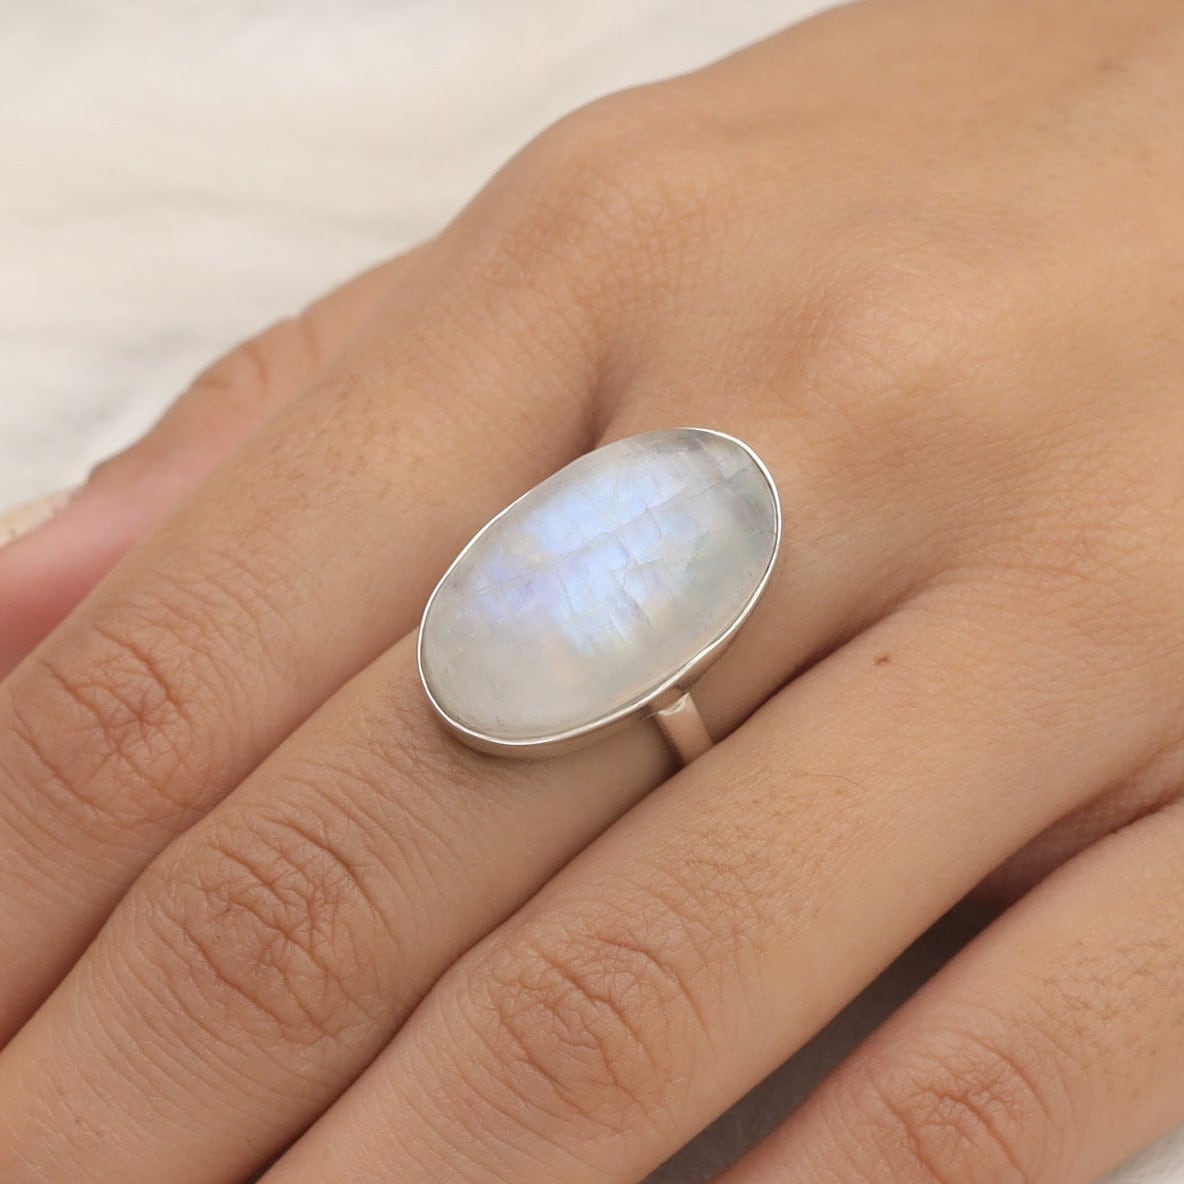 Rainbow Moonstone Ring, 925 Sterling Silver Ring, June Birthstone Ring, Oval Shaped Ring, Handmade Jewelry, Elegant Ring, Gift for Her